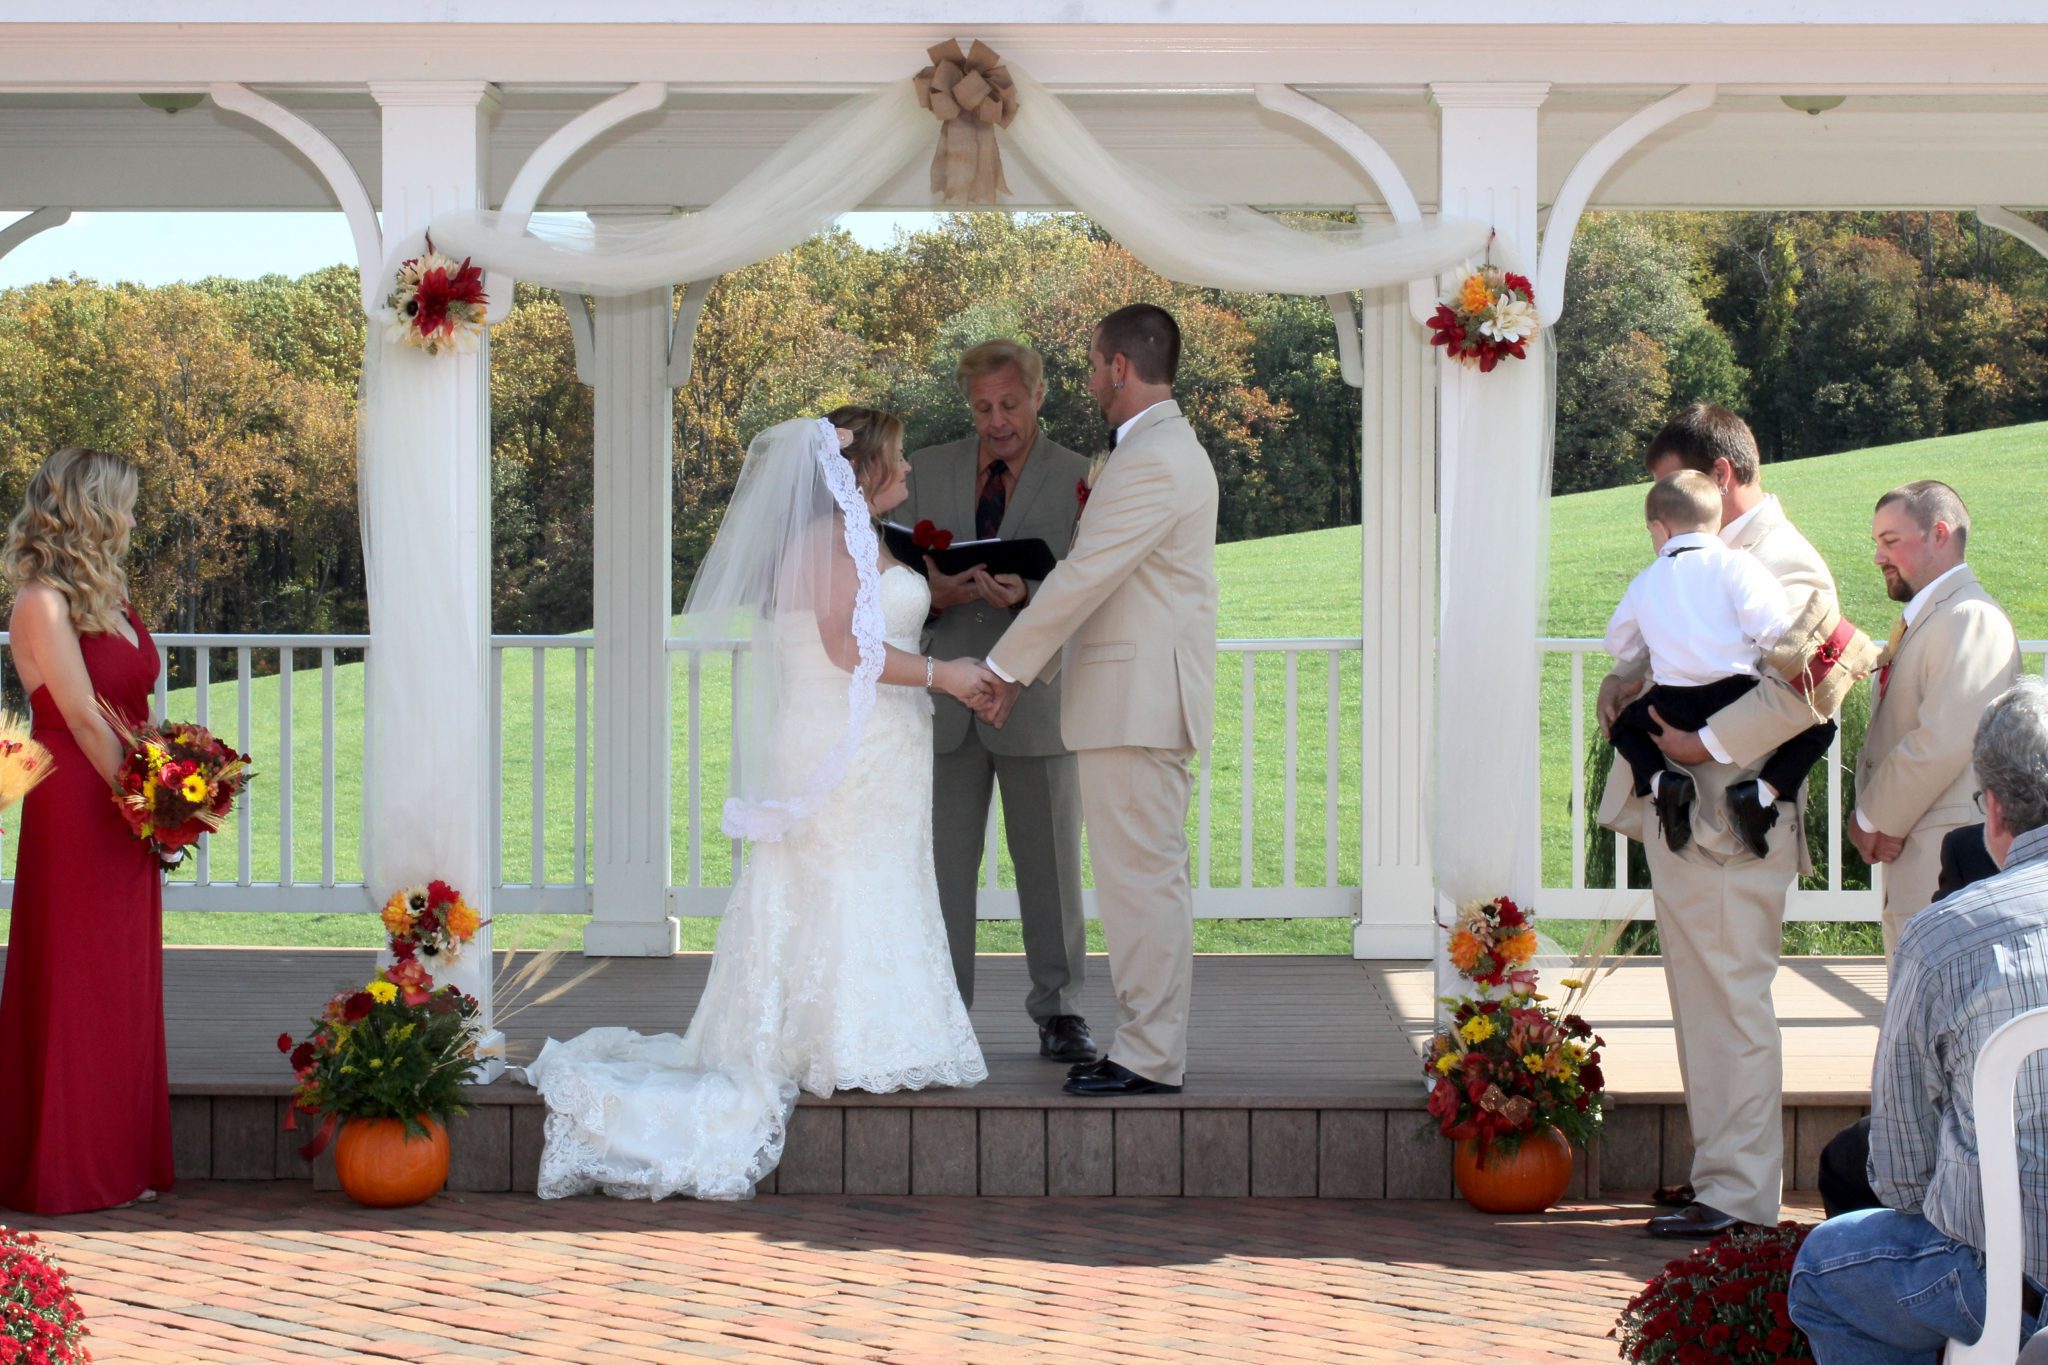 The couple exchange vows on the outdoor pavilion on a gorgeous fall day